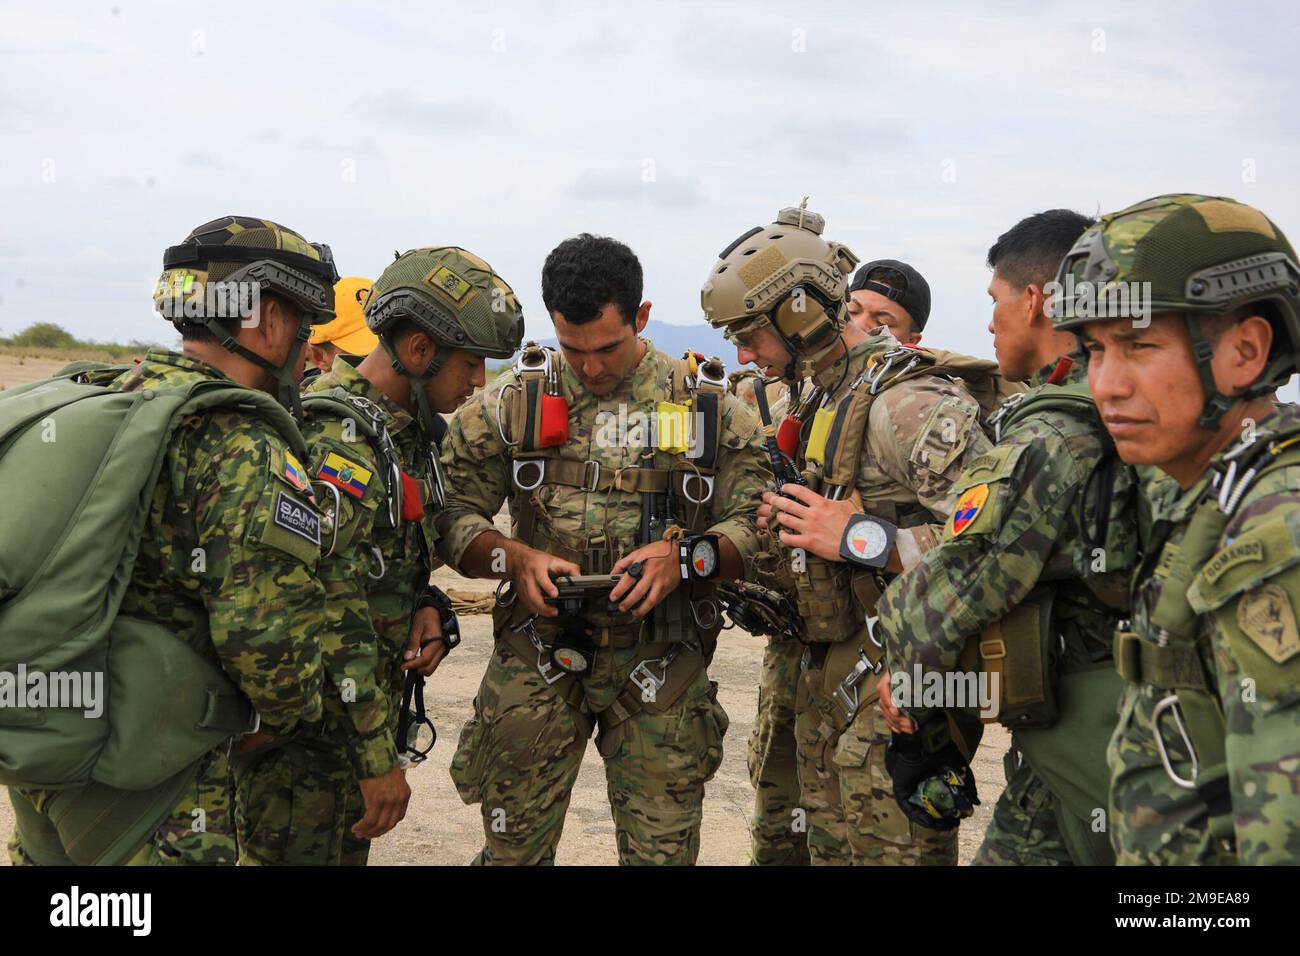 Members of the 7th Special Forces  Group (Airborne) along with their Ecuadorian Special Forces partners go over their jump plan before a high altitude, low opening (HALO) jump in Manta, Ecuador, May 19, 2022. Ecuadorian military and US forces are conducting routine military exchanges from May 6-27 between the cities of Manta and Latacunga. Bilateral exchanges allow both militaries to strengthen tactical readiness for future operations maintain readiness and support continue commitment in responding to emerging security crises and natural disasters.    ( U.S. Army photos by Staff Sgt. Matthew G Stock Photo